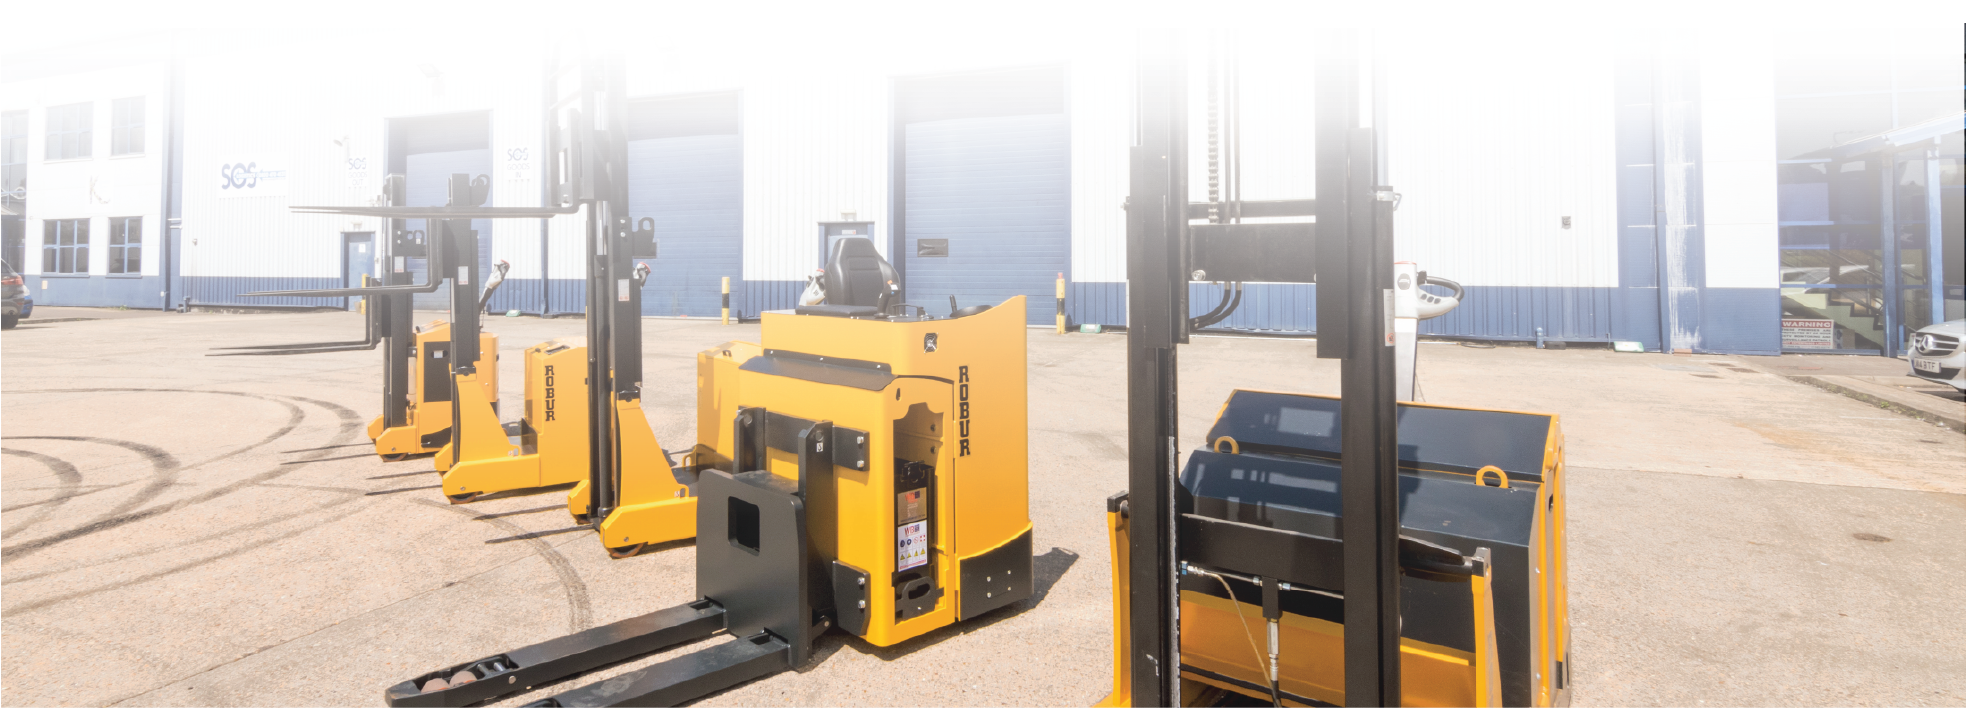 failsafe spring-set electrically released motor brakes for class 1-3 electric forklifts